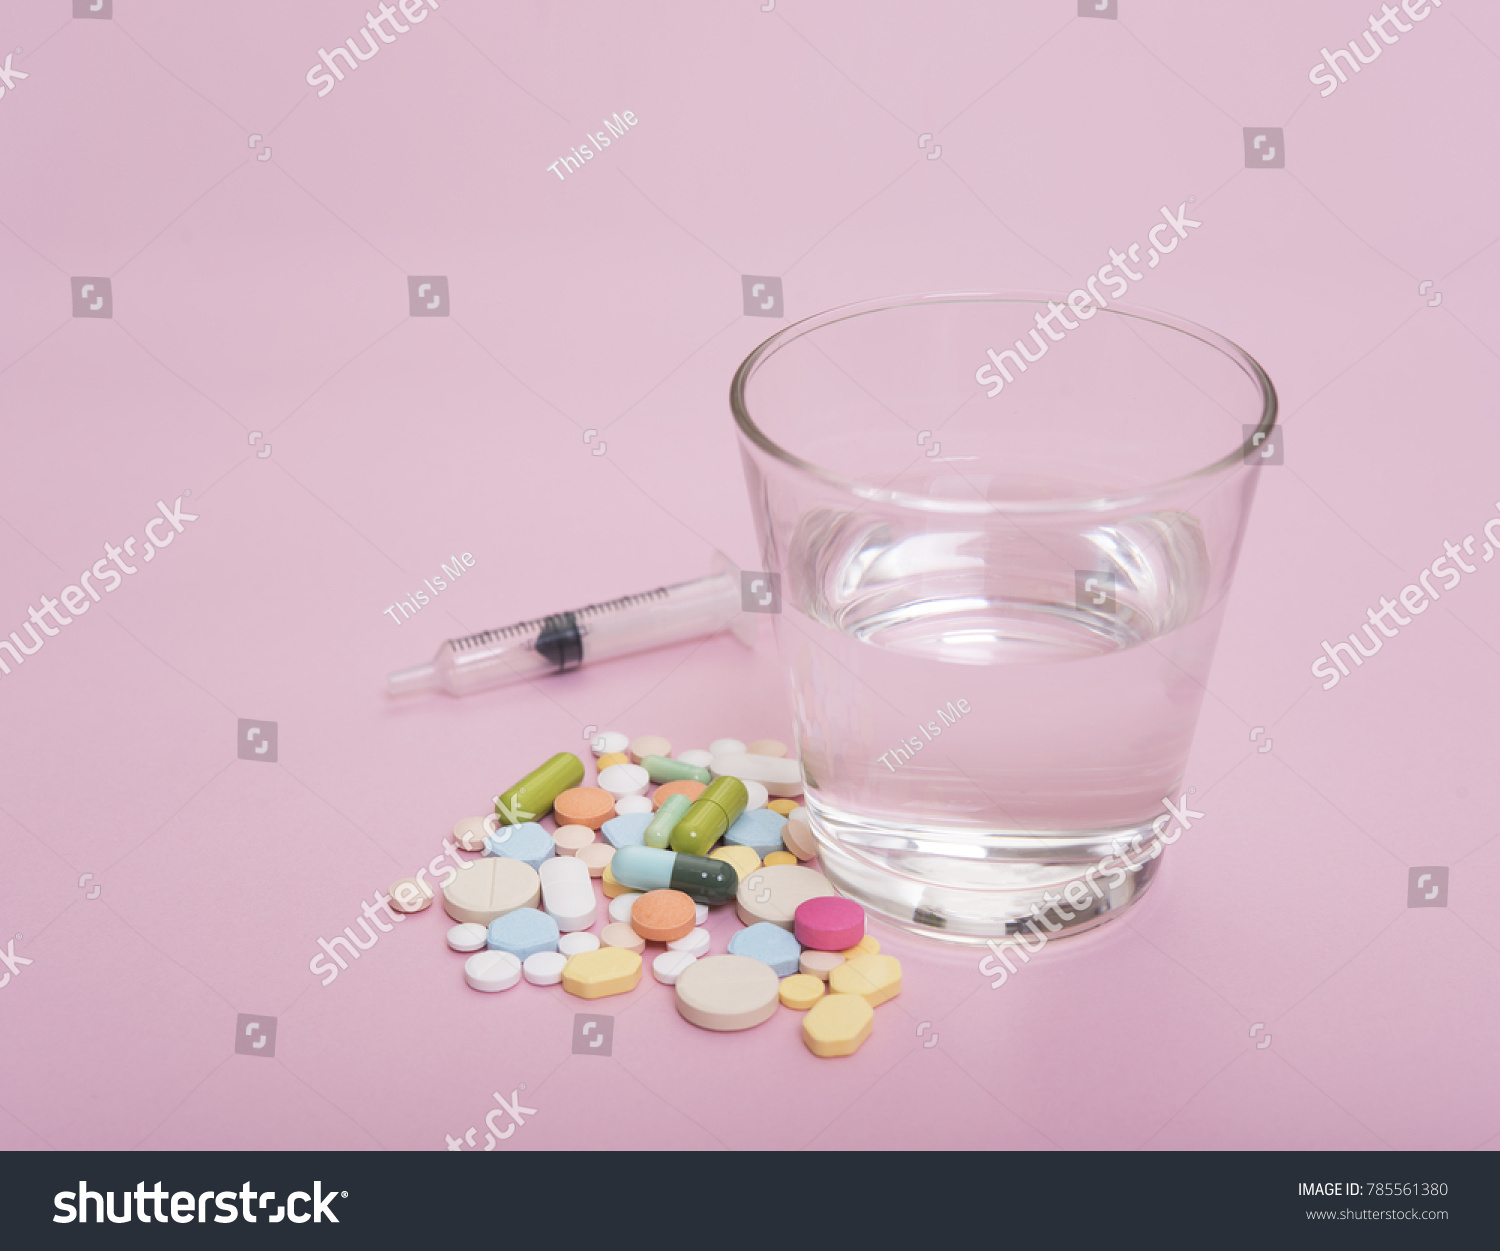 colorful medicine and glass of water on pink background. #785561380